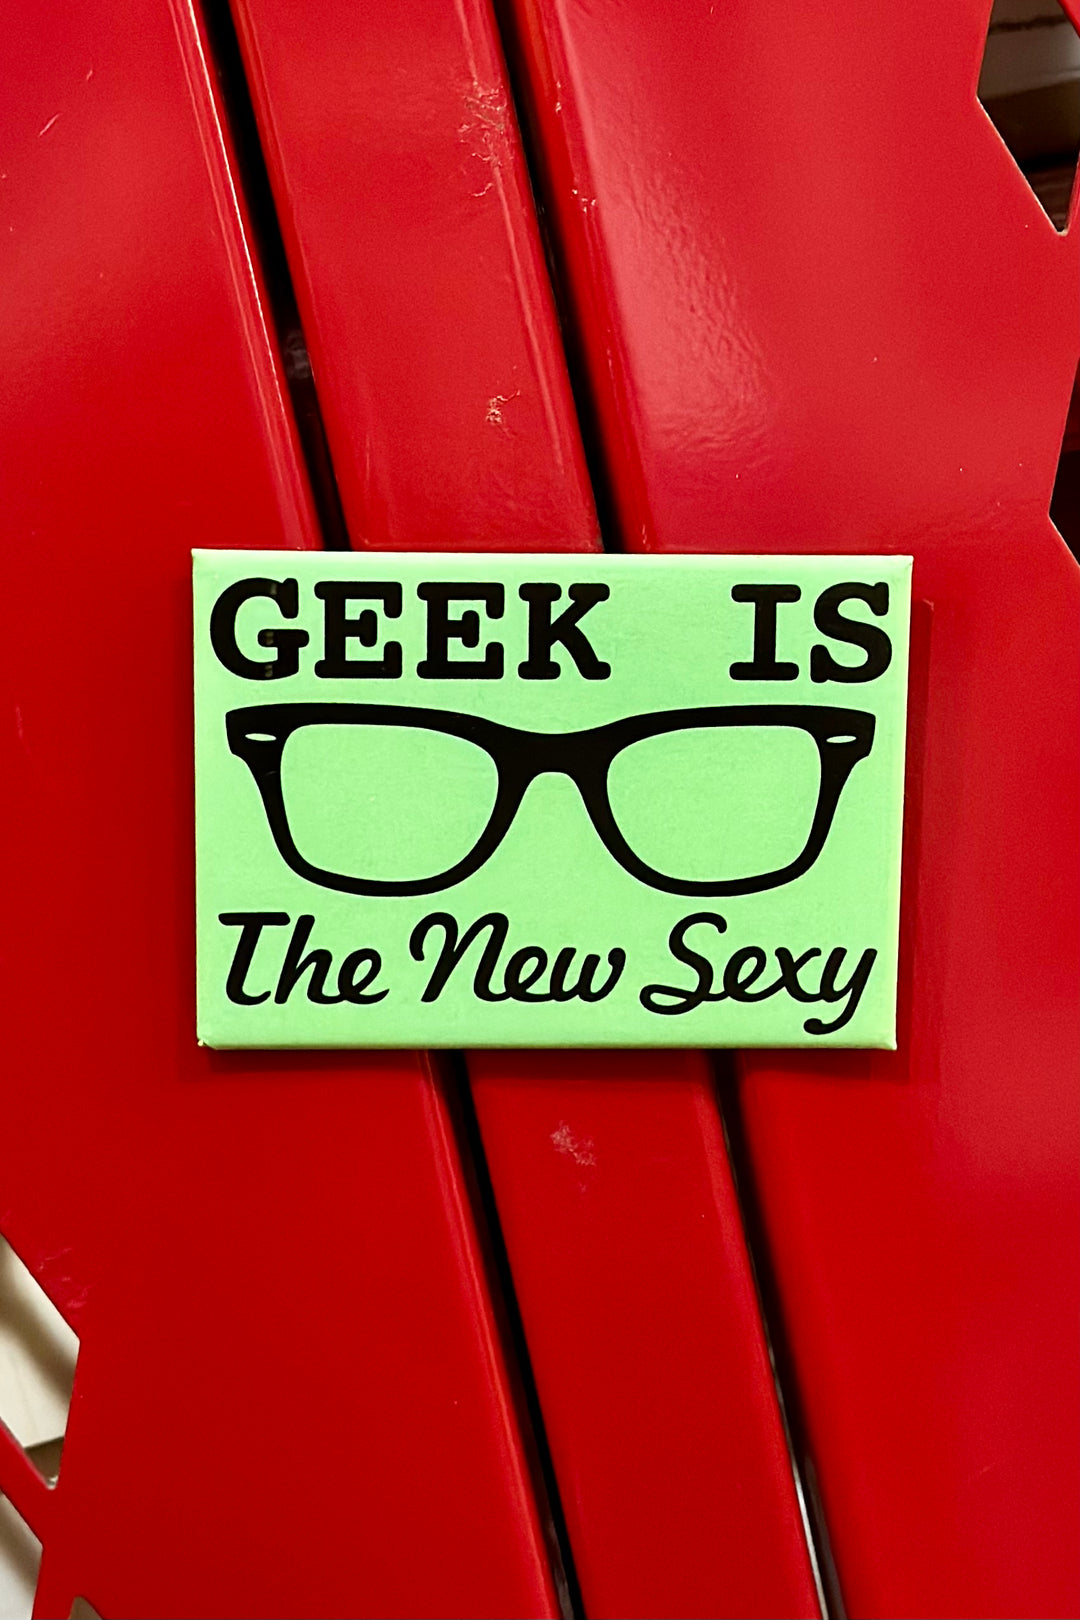 Geek is the New Sexy Magnet